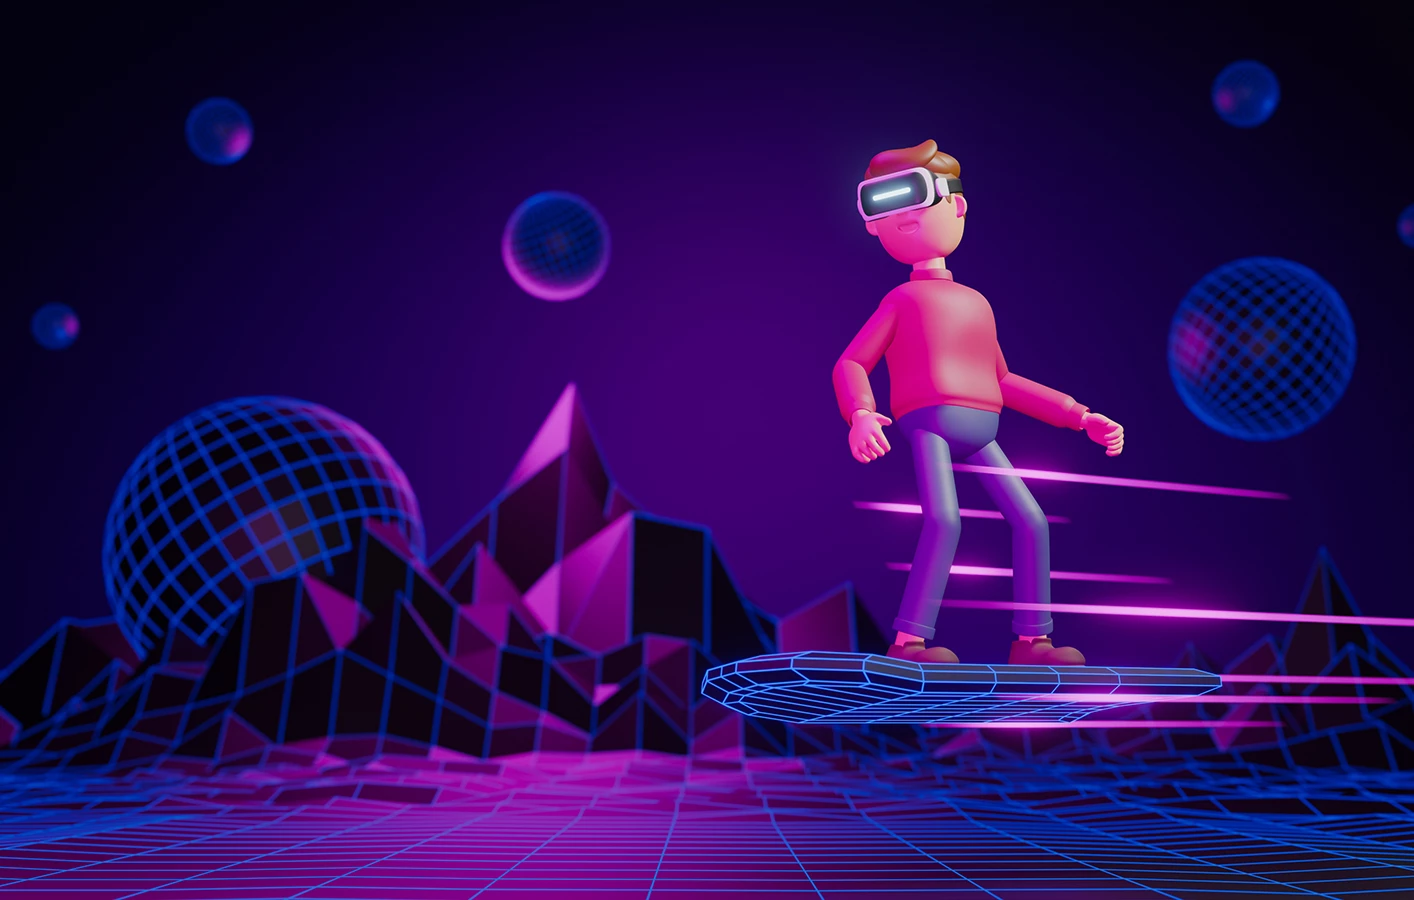 Five things to consider when delivering experiences on the metaverse